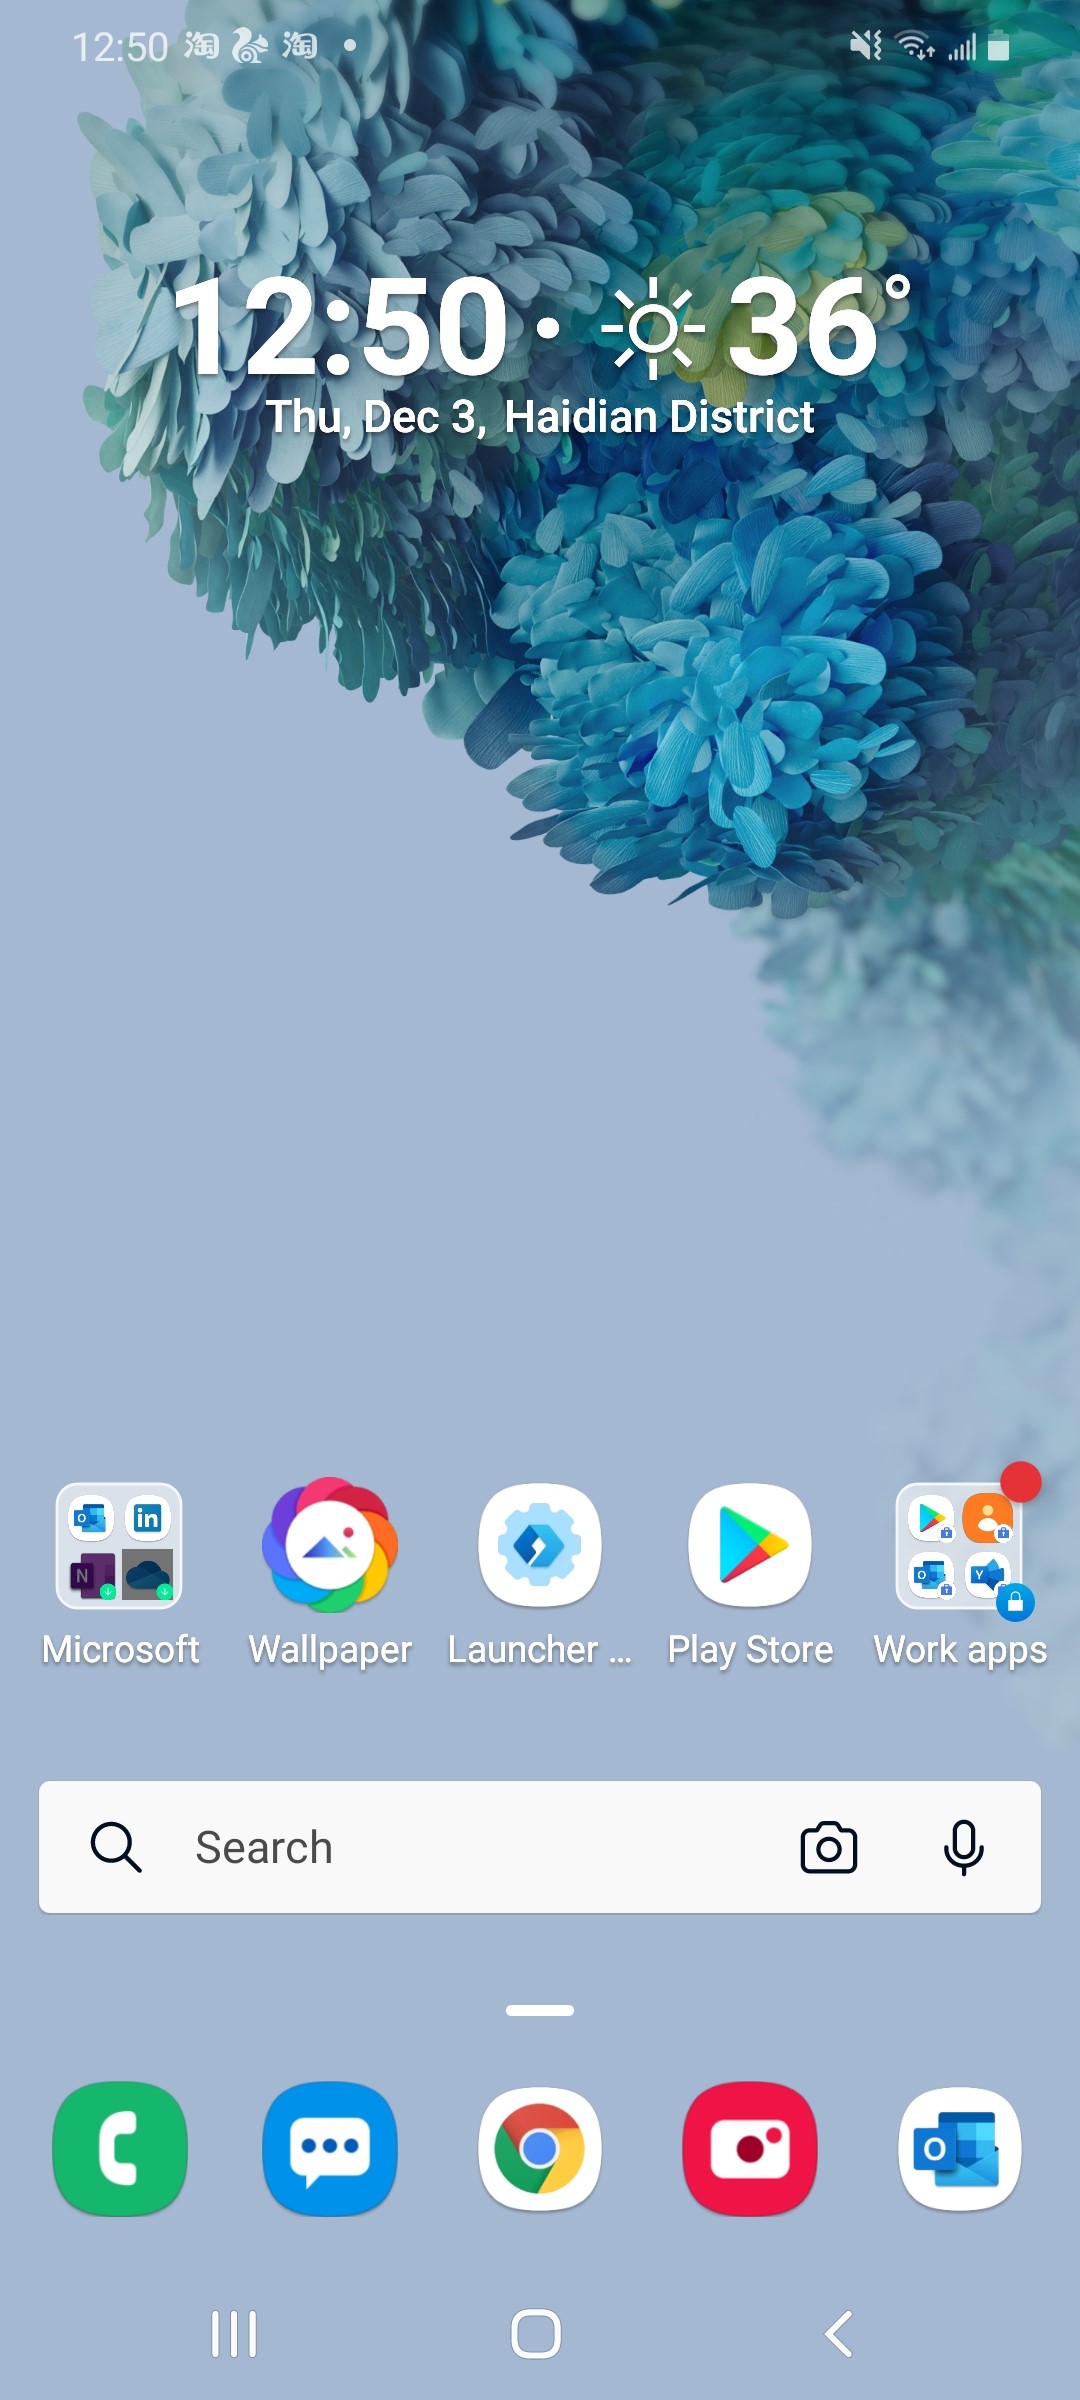 Using Microsoft Launcher on Android